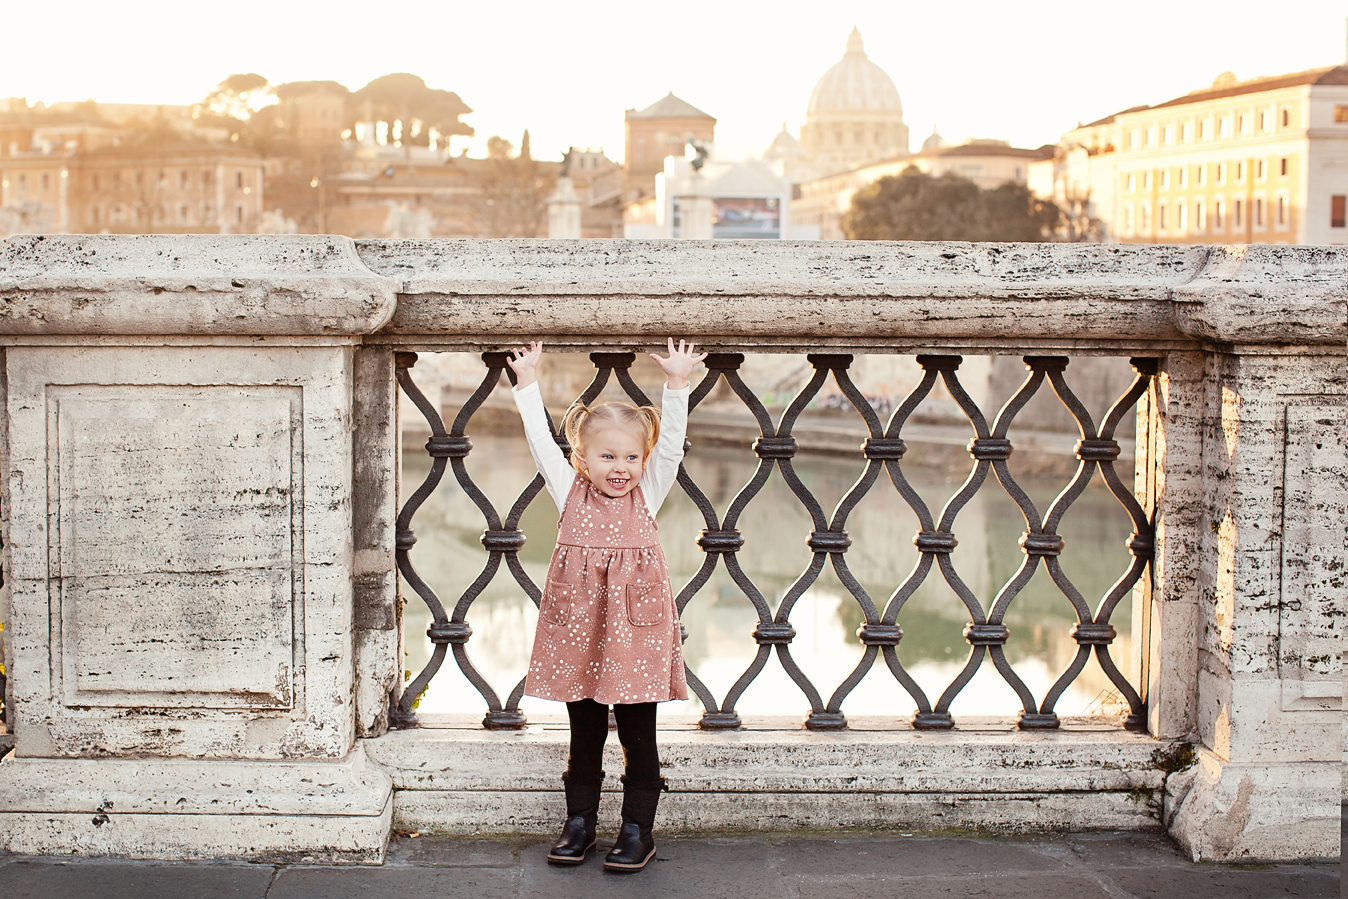 Vatican photo shoot | Take back beautiful memories from your vacation in Rome | family photographer in rome | things to do in Rome, creative travel ideas, vacation packages, personal vacation photographer, rome photographer